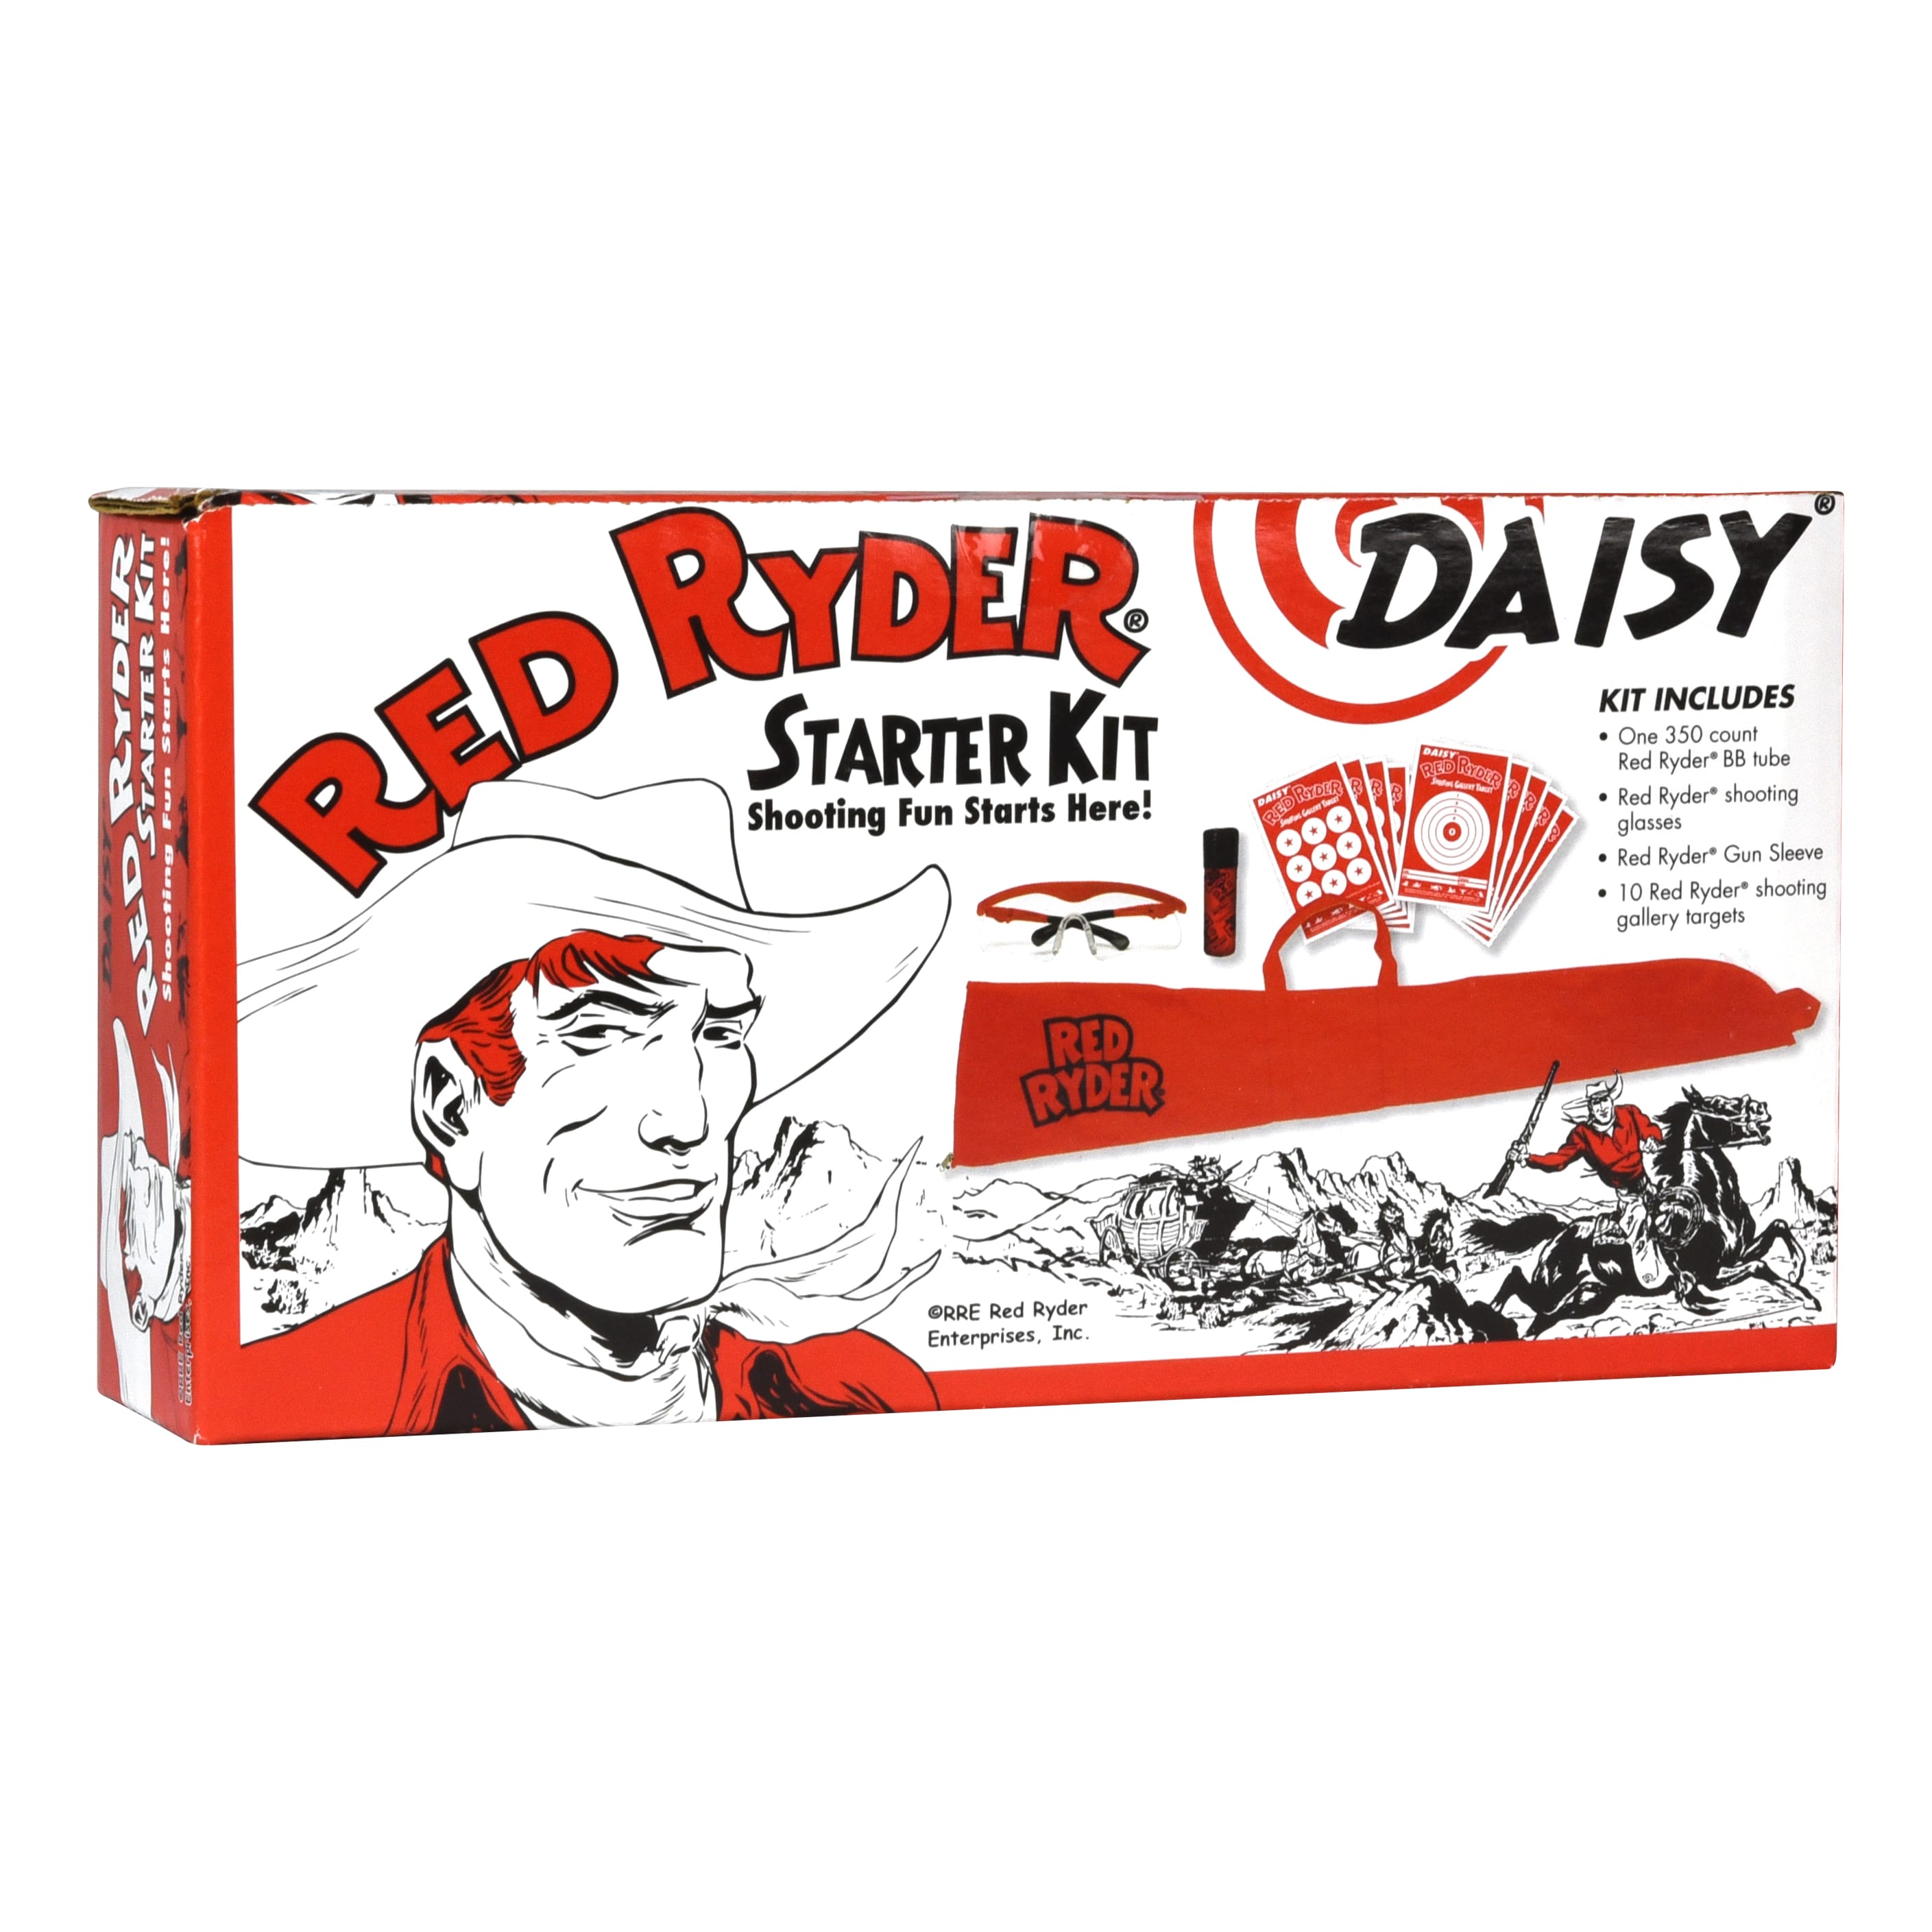 Daisy® Red Ryder Retro Starter Kit - Packaging View